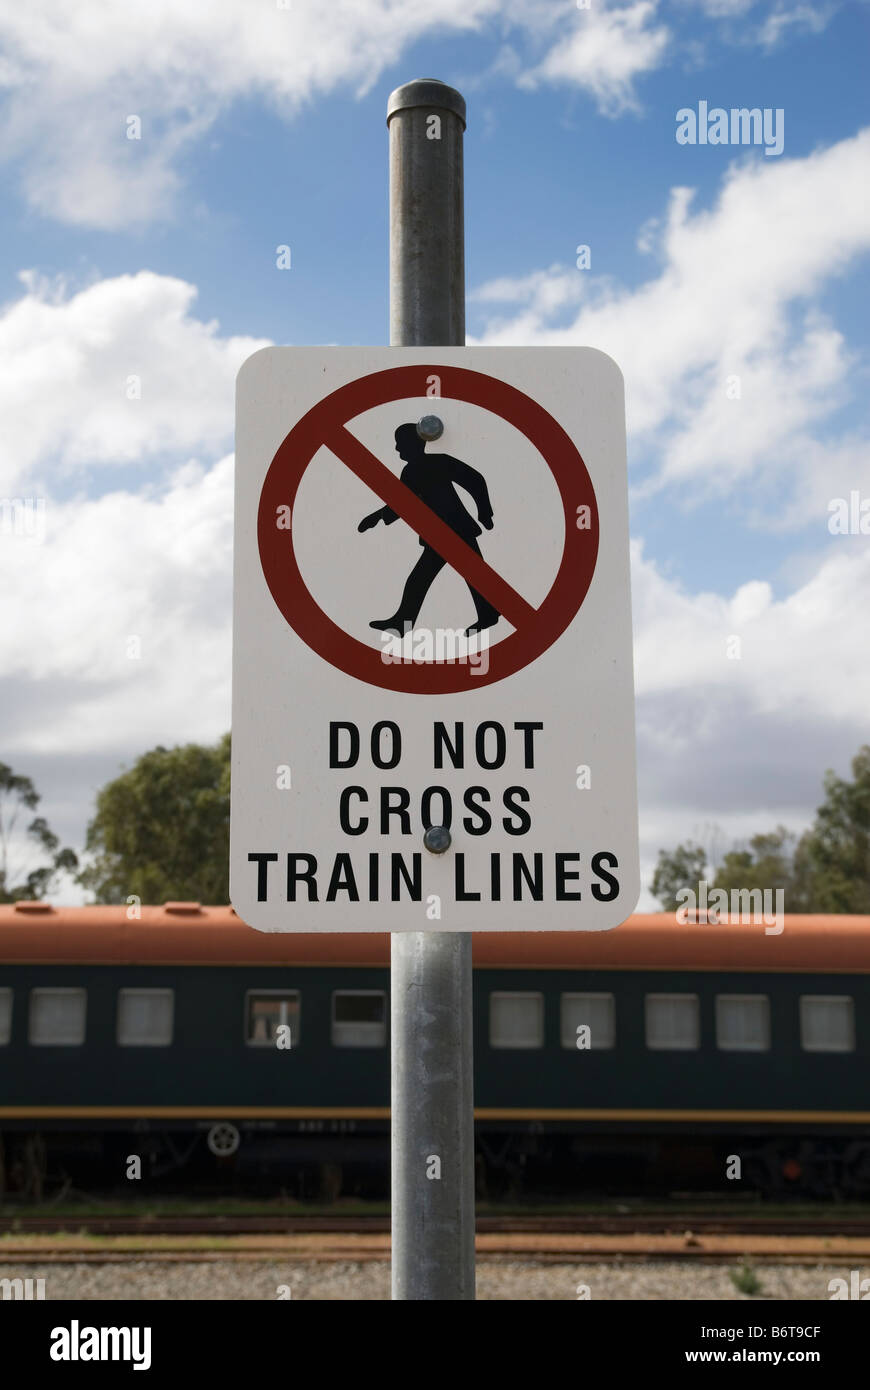 Rail safety sign, do not cross train lines Stock Photo